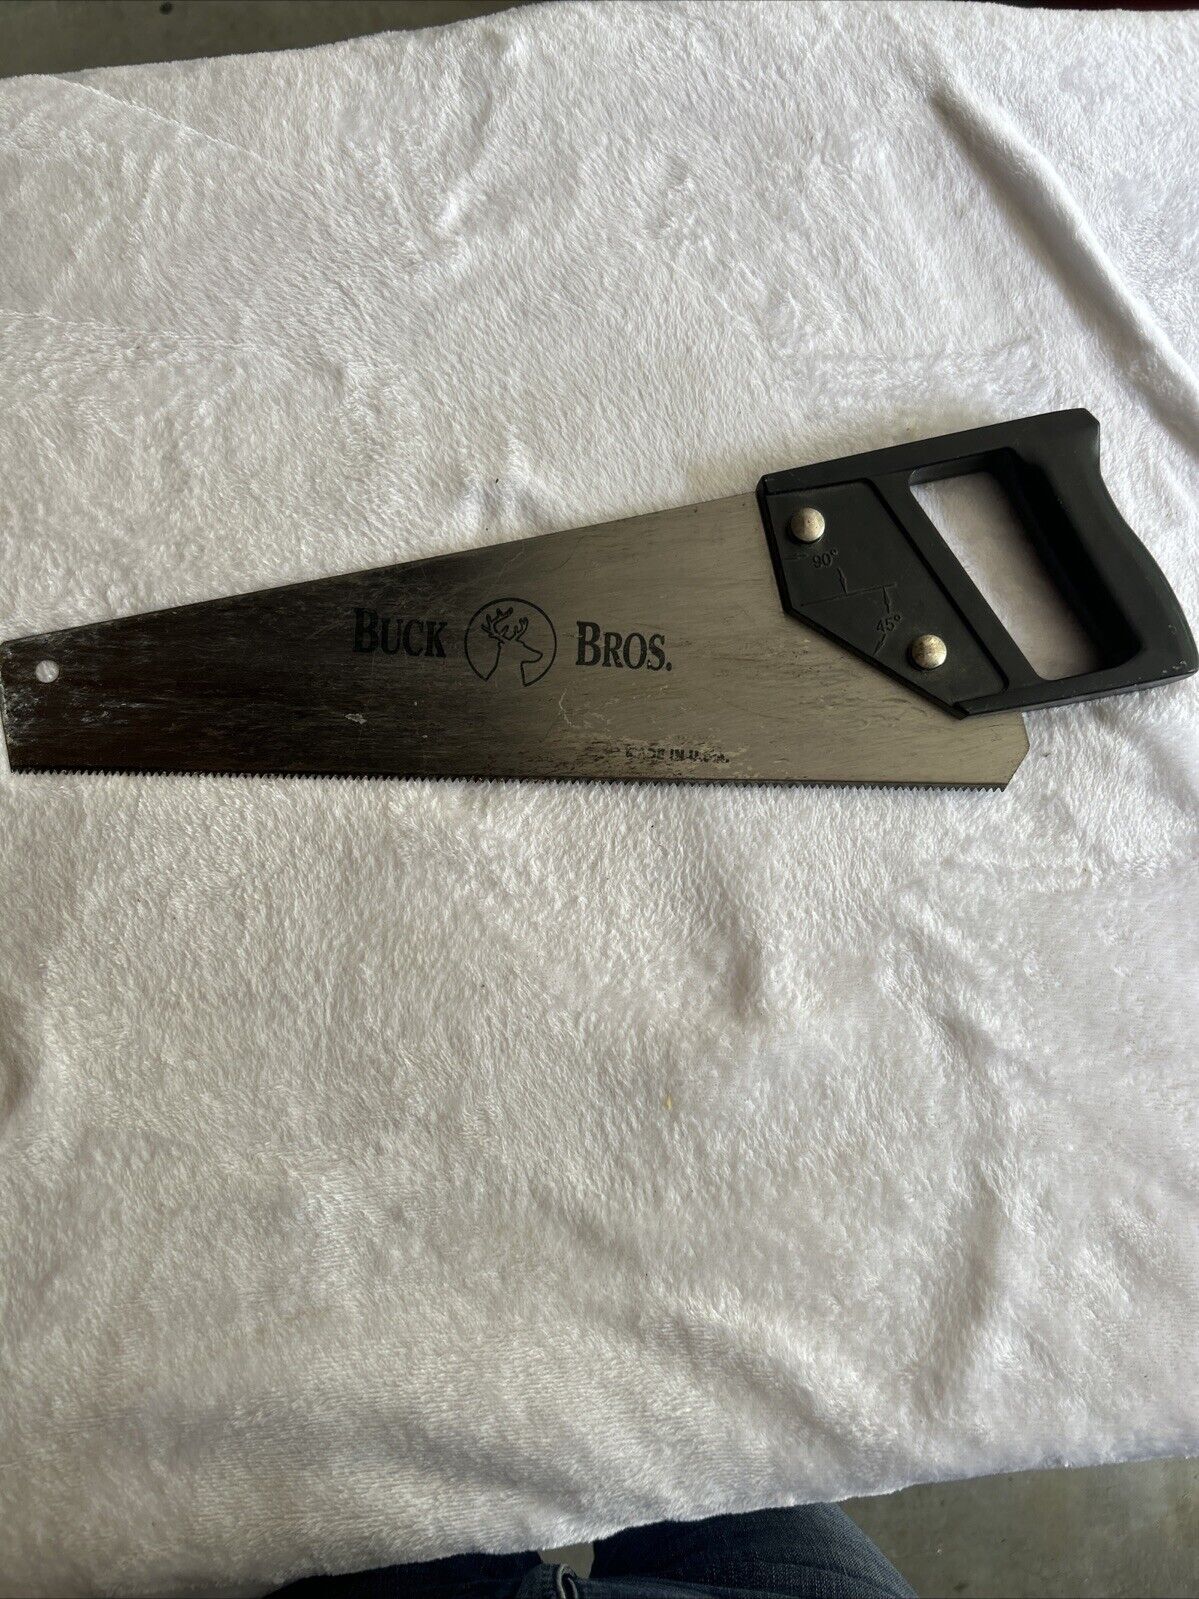 Buck Bros Vintage 14” Hand Saw Made In USA Pre-owned